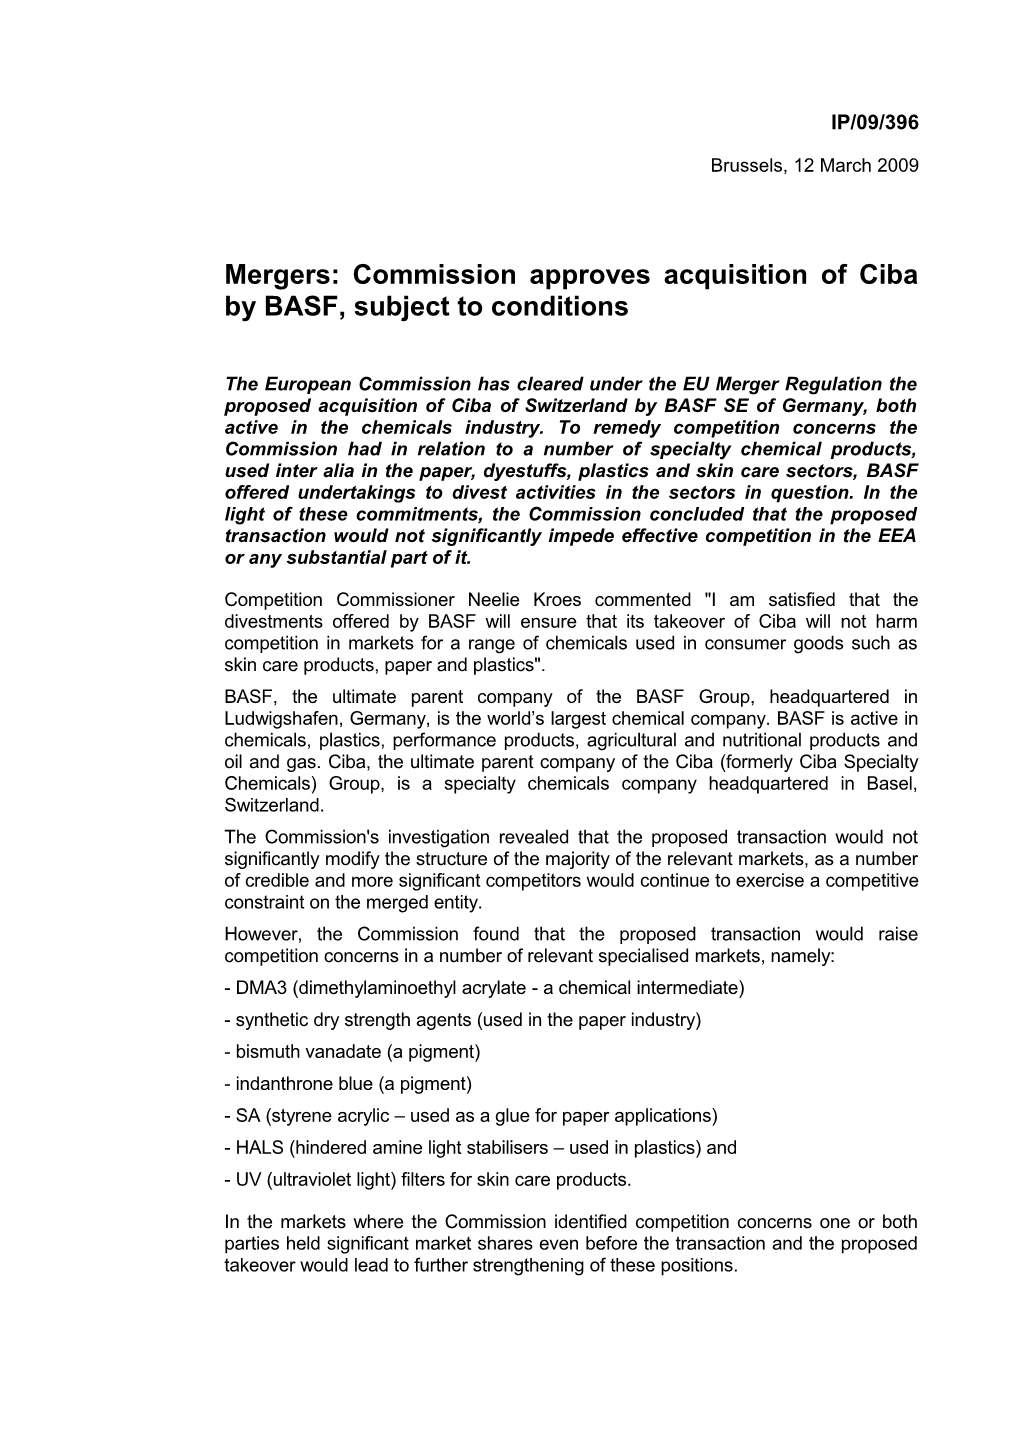 Mergers: Commission Approves Acquisition of Ciba by BASF, Subject to Conditions